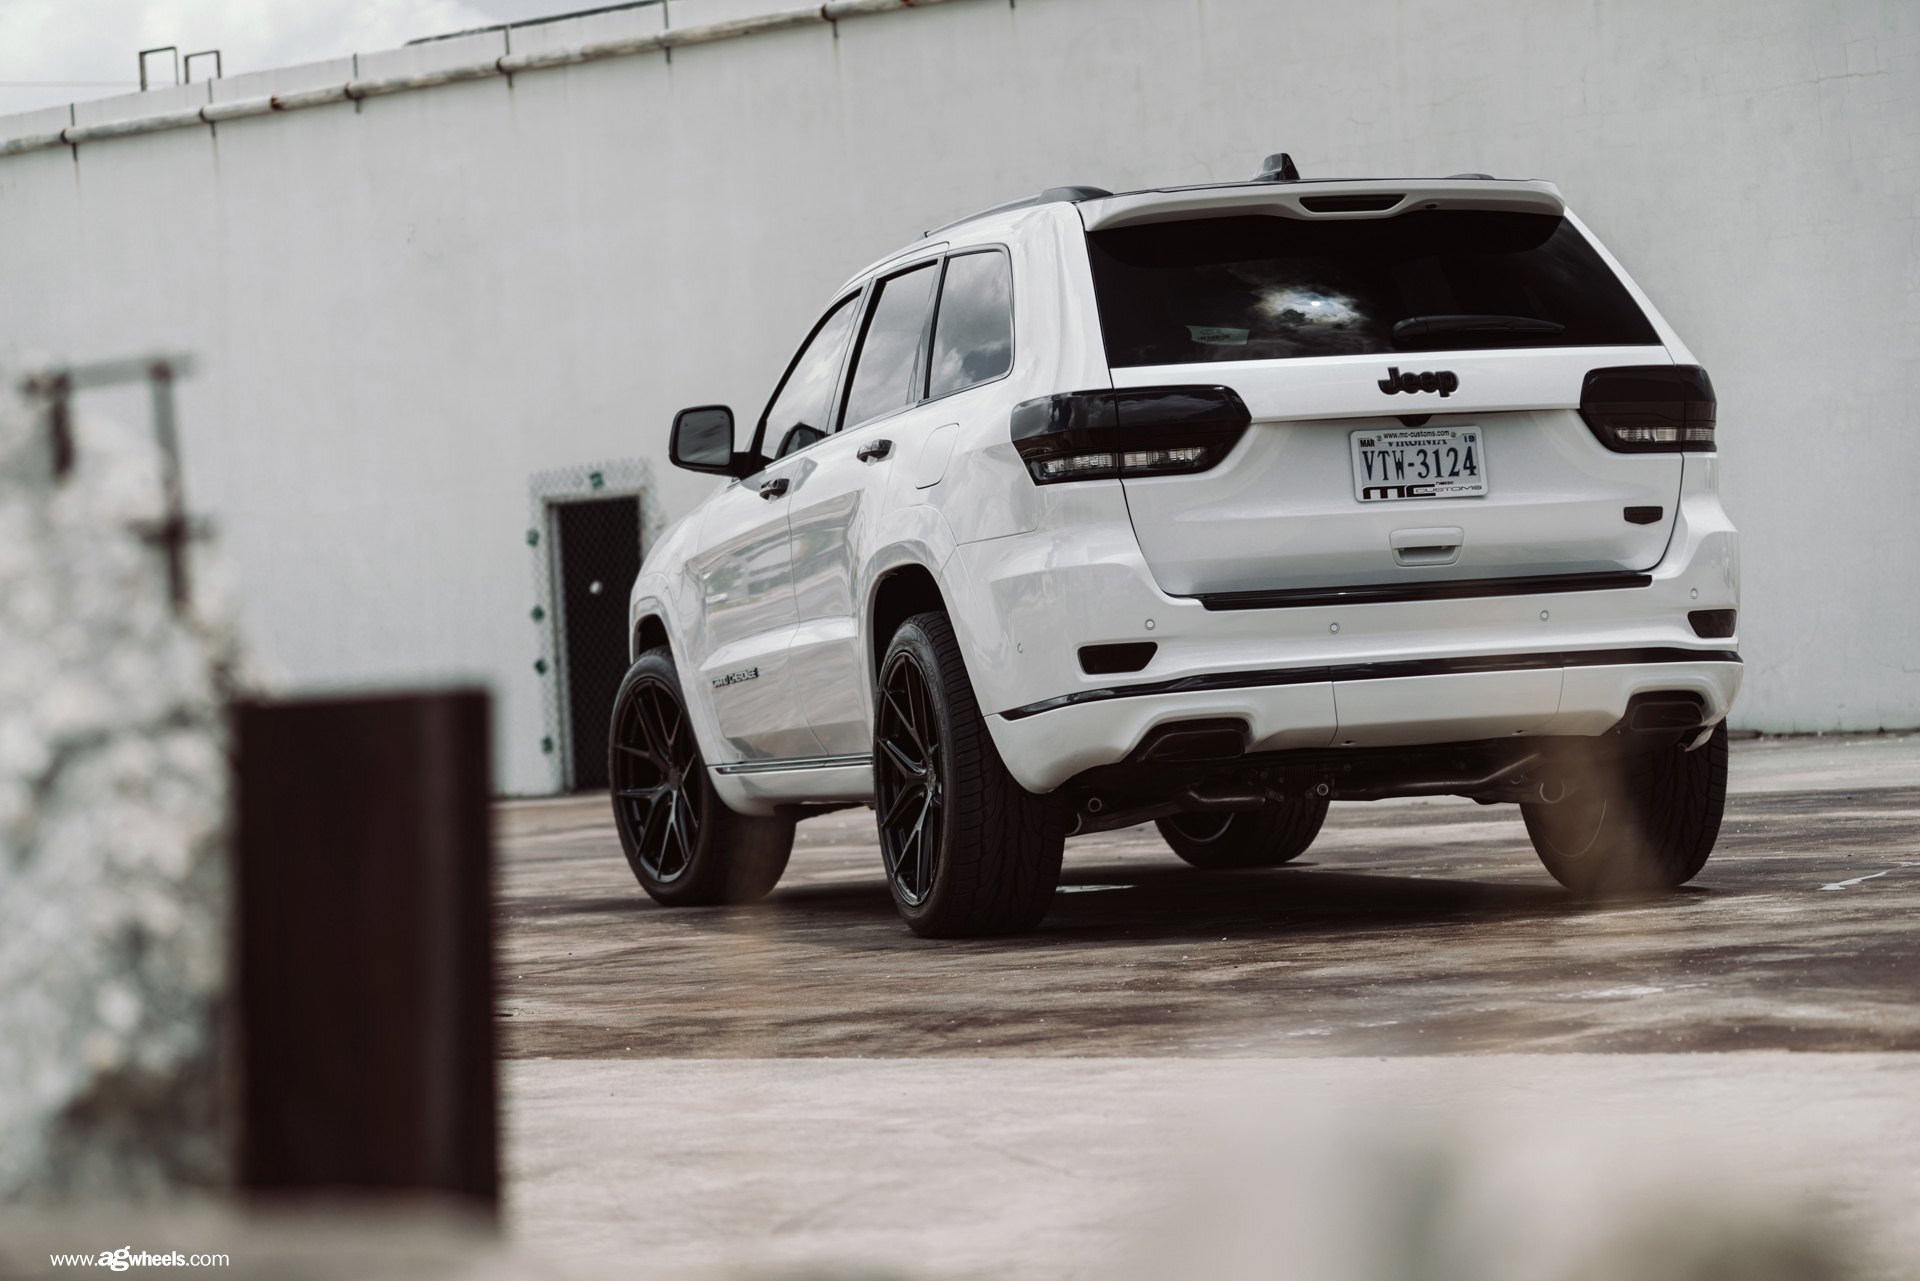 Red Smoke Taillights on White Jeep Grand Cherokee - Photo by Avant Garde Wheels